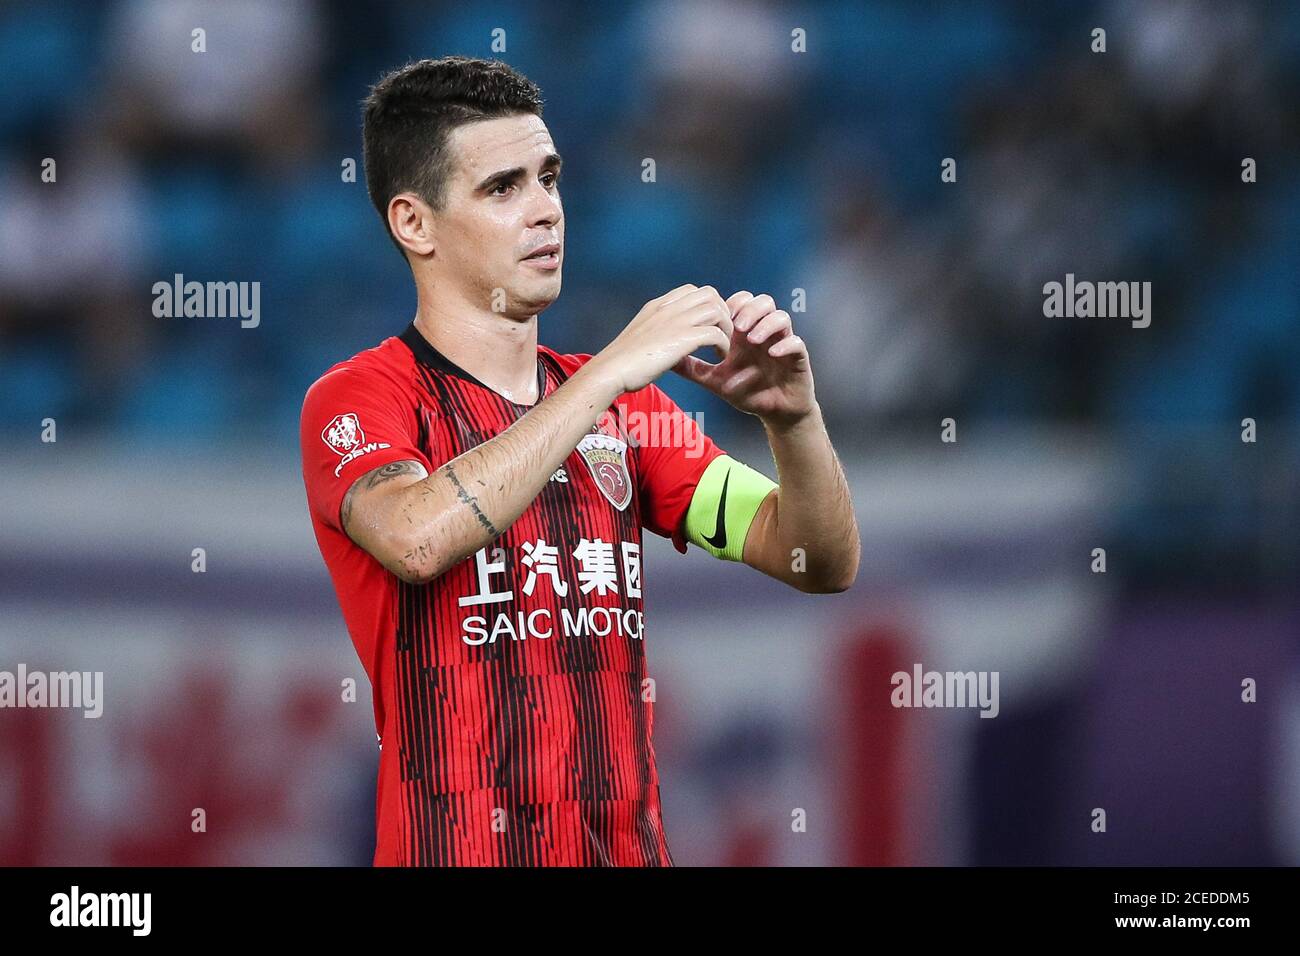 Brazilian football player Oscar dos Santos Emboaba Junior, better known as  simply Oscar, of Shanghai SIPG F.C. celebrates after scoring a goal during  the eighth-round match of 2020 Chinese Super League (CSL)